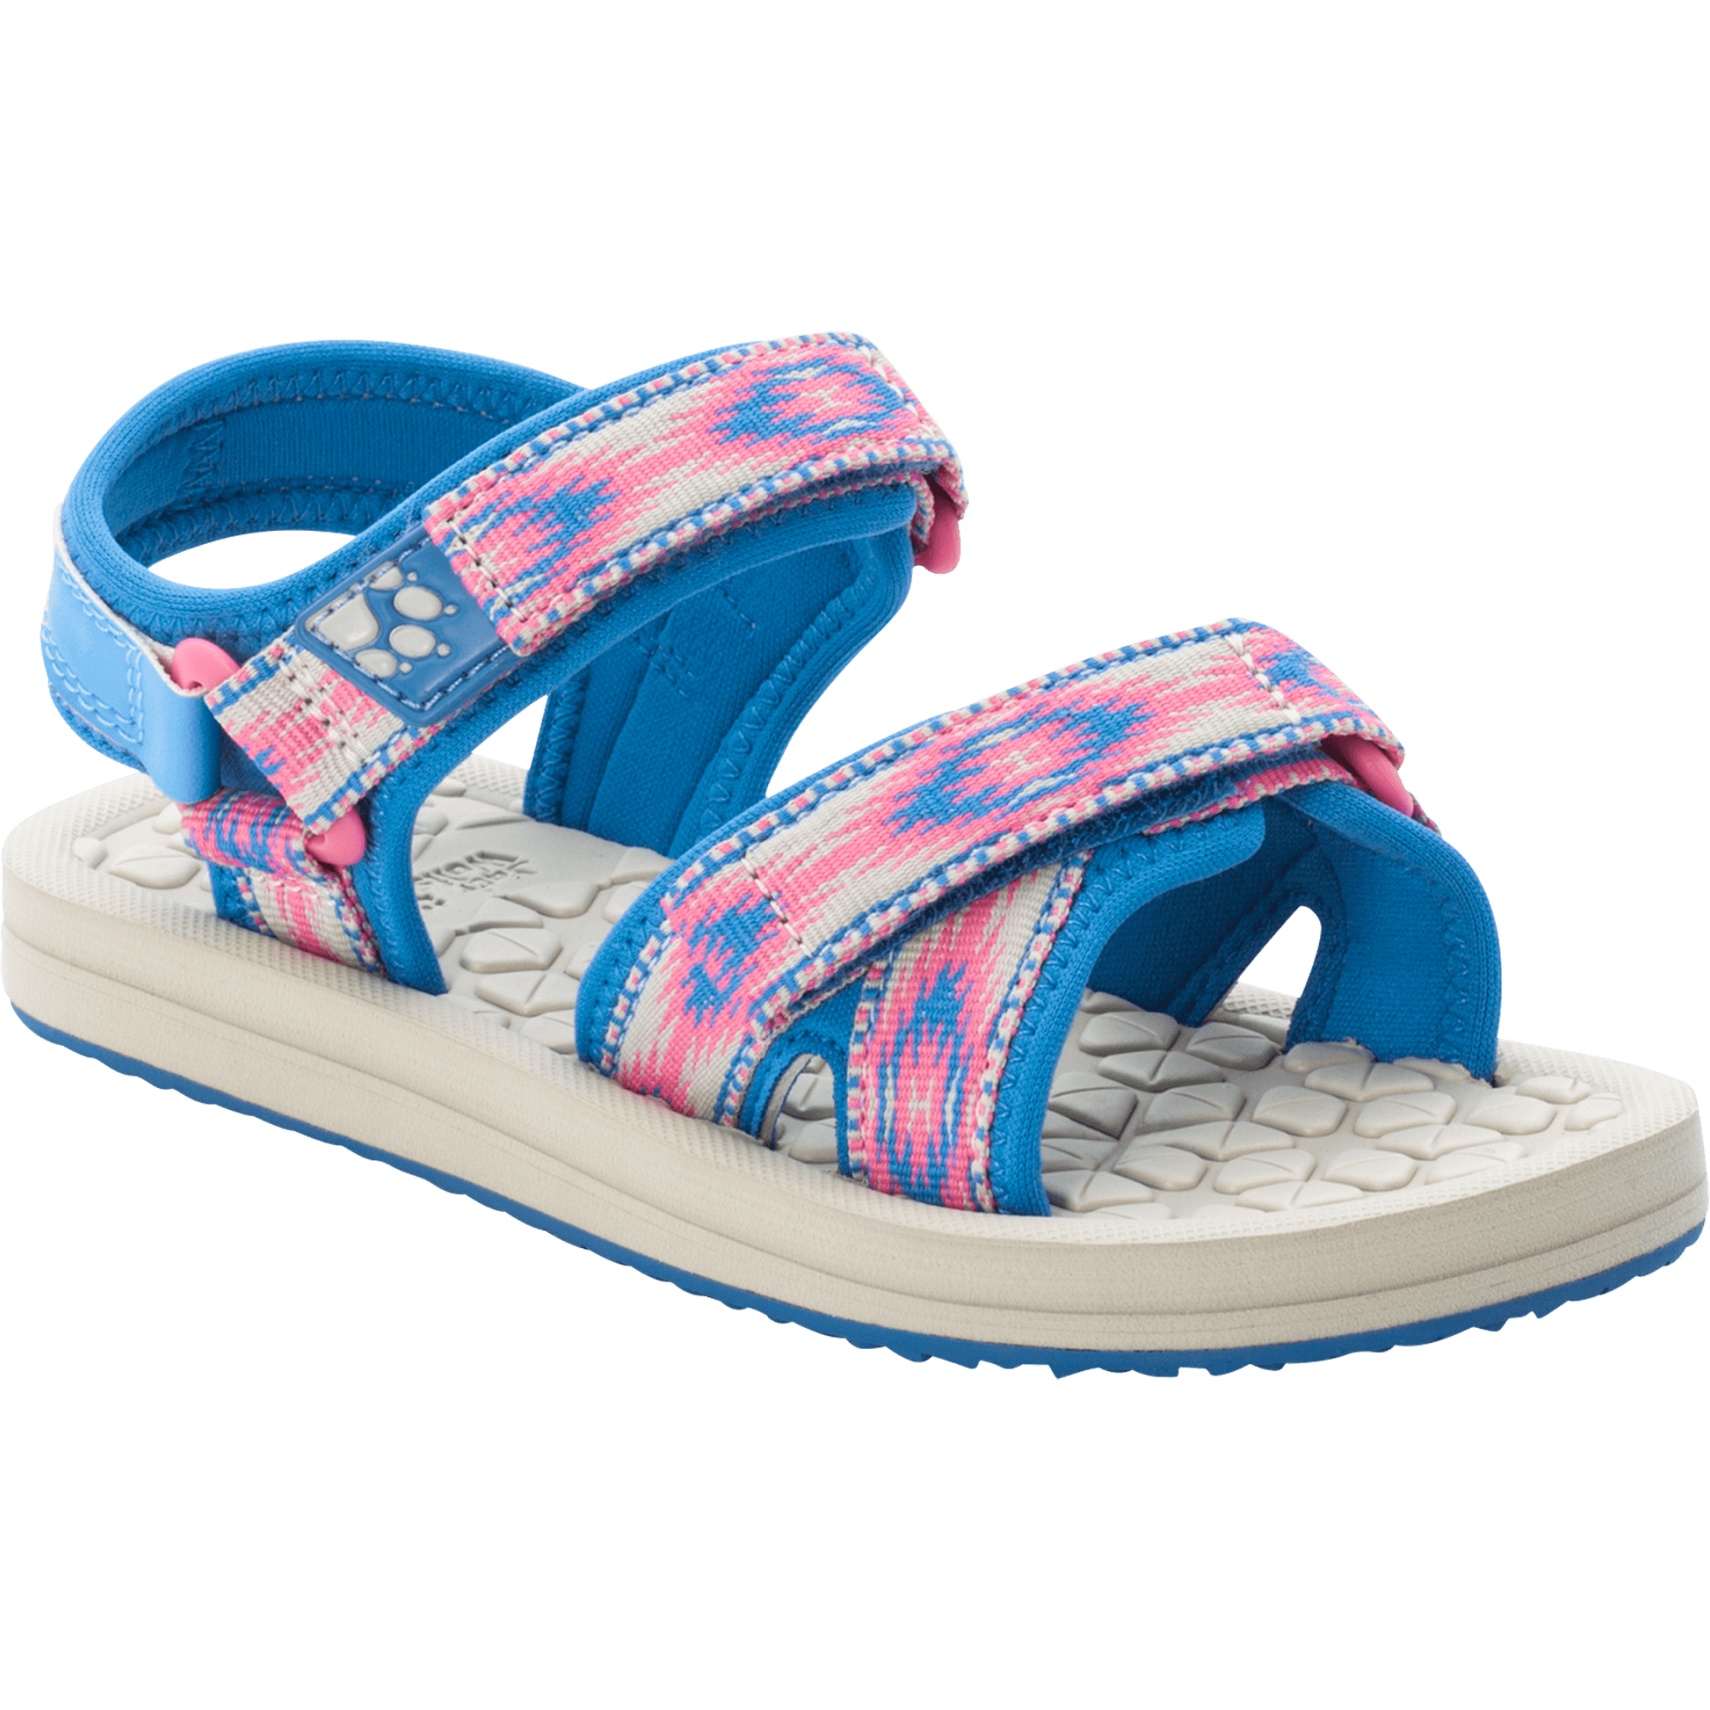 Picture of Jack Wolfskin Zulu VC Sandals Kids - coral / blue